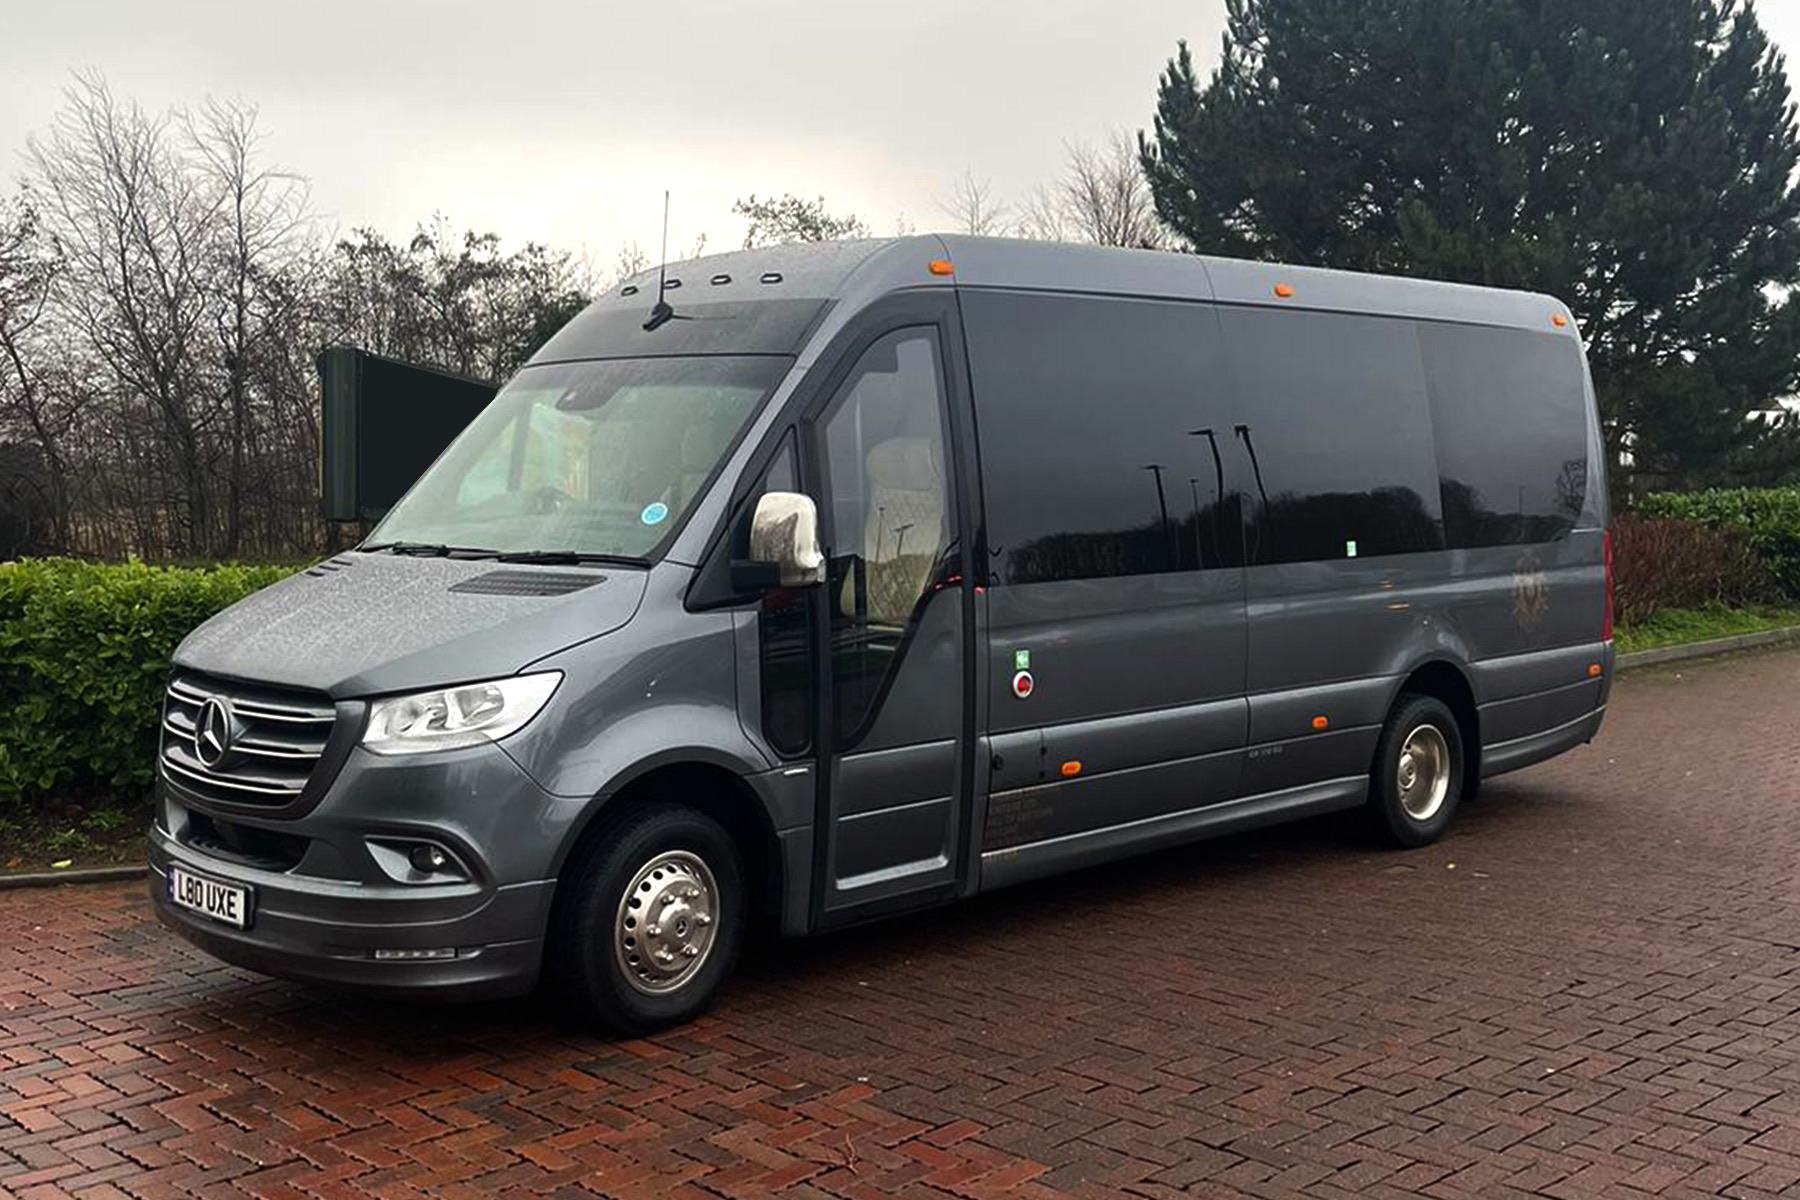 Top Tips for Cost-Effective Minibus Hire Across the UK